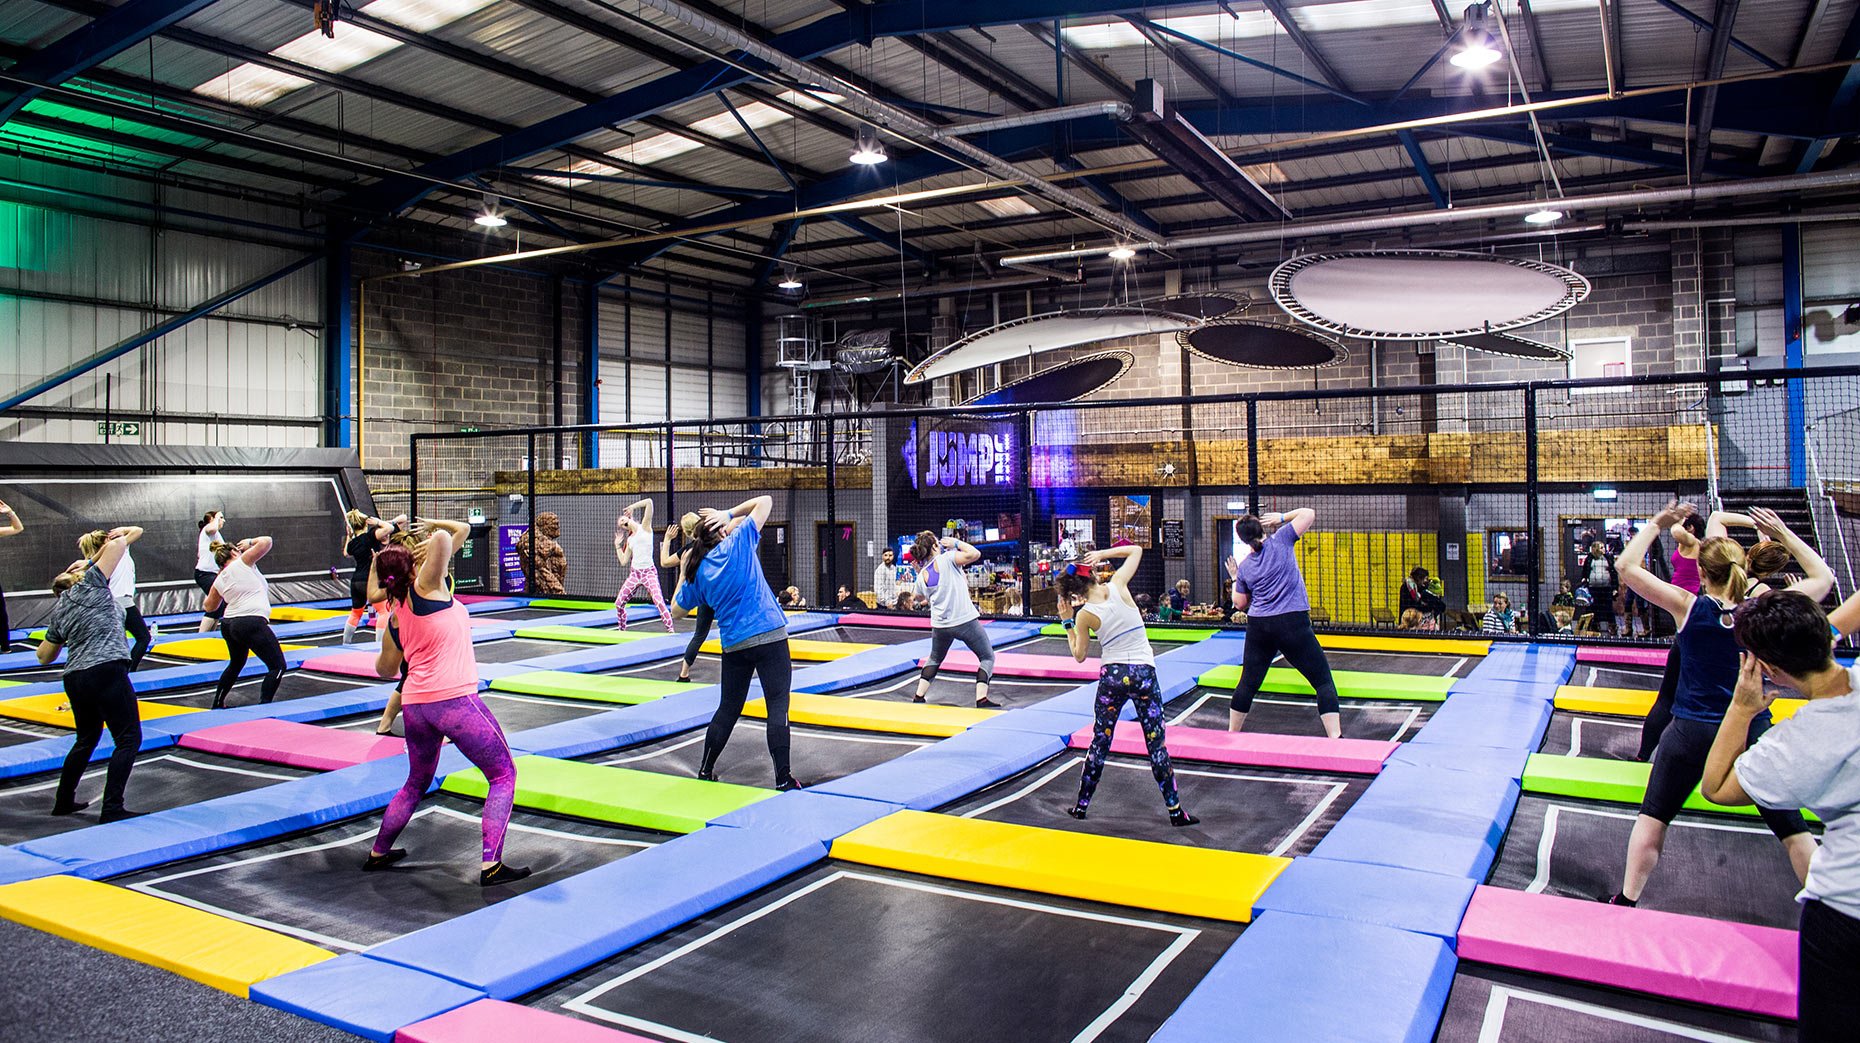 Trampoline fitness classes will be run from the park. 